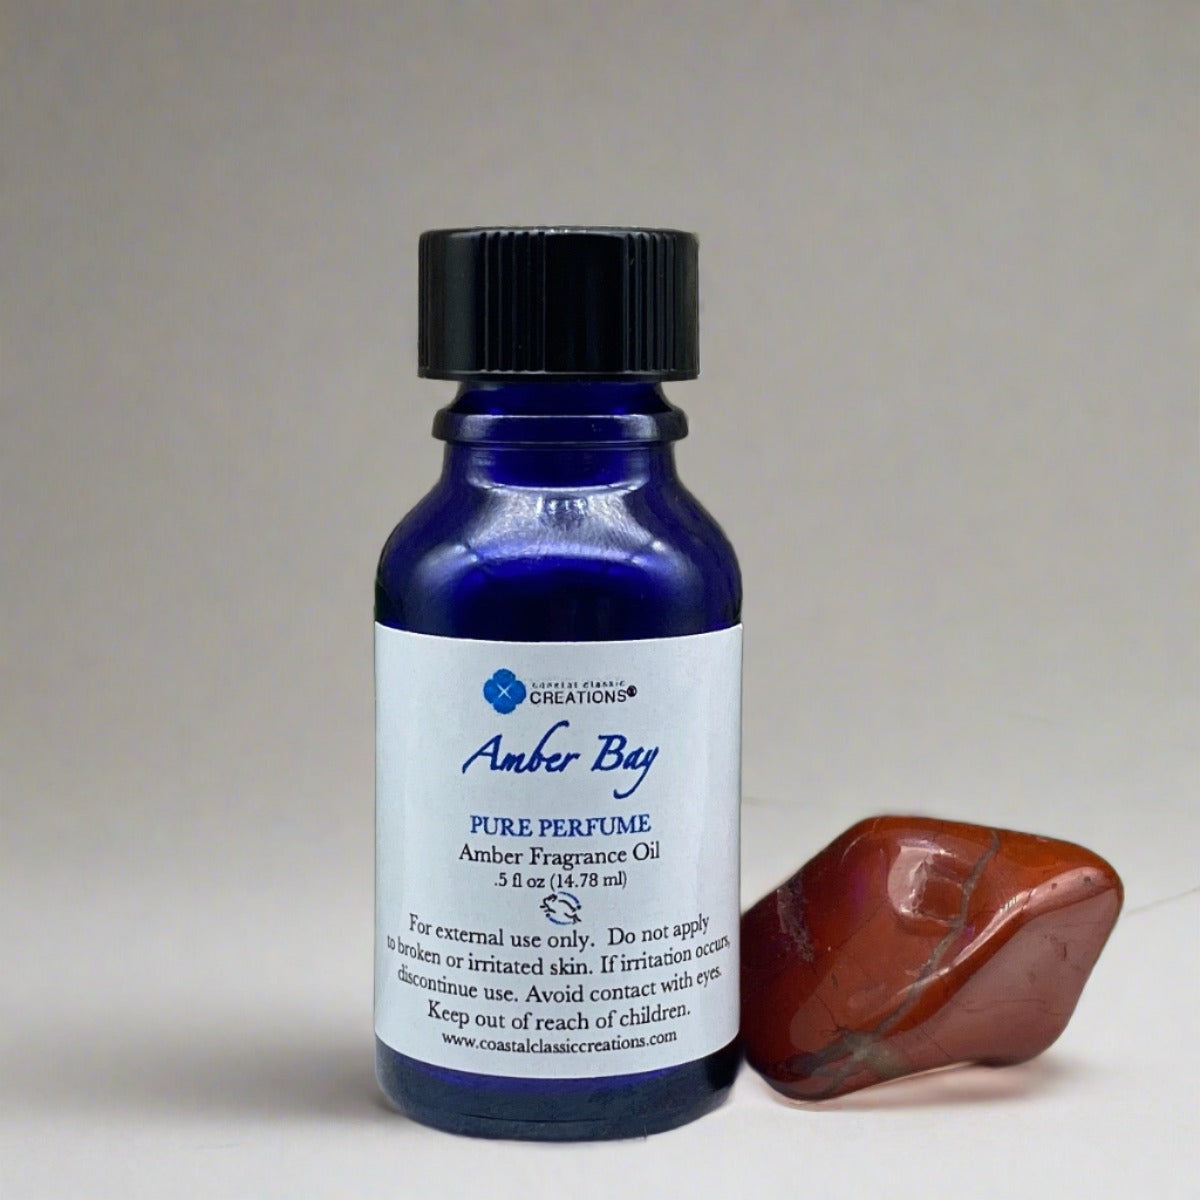 Bottle of Amber Bay Amber Perfume with a red polished stone accent